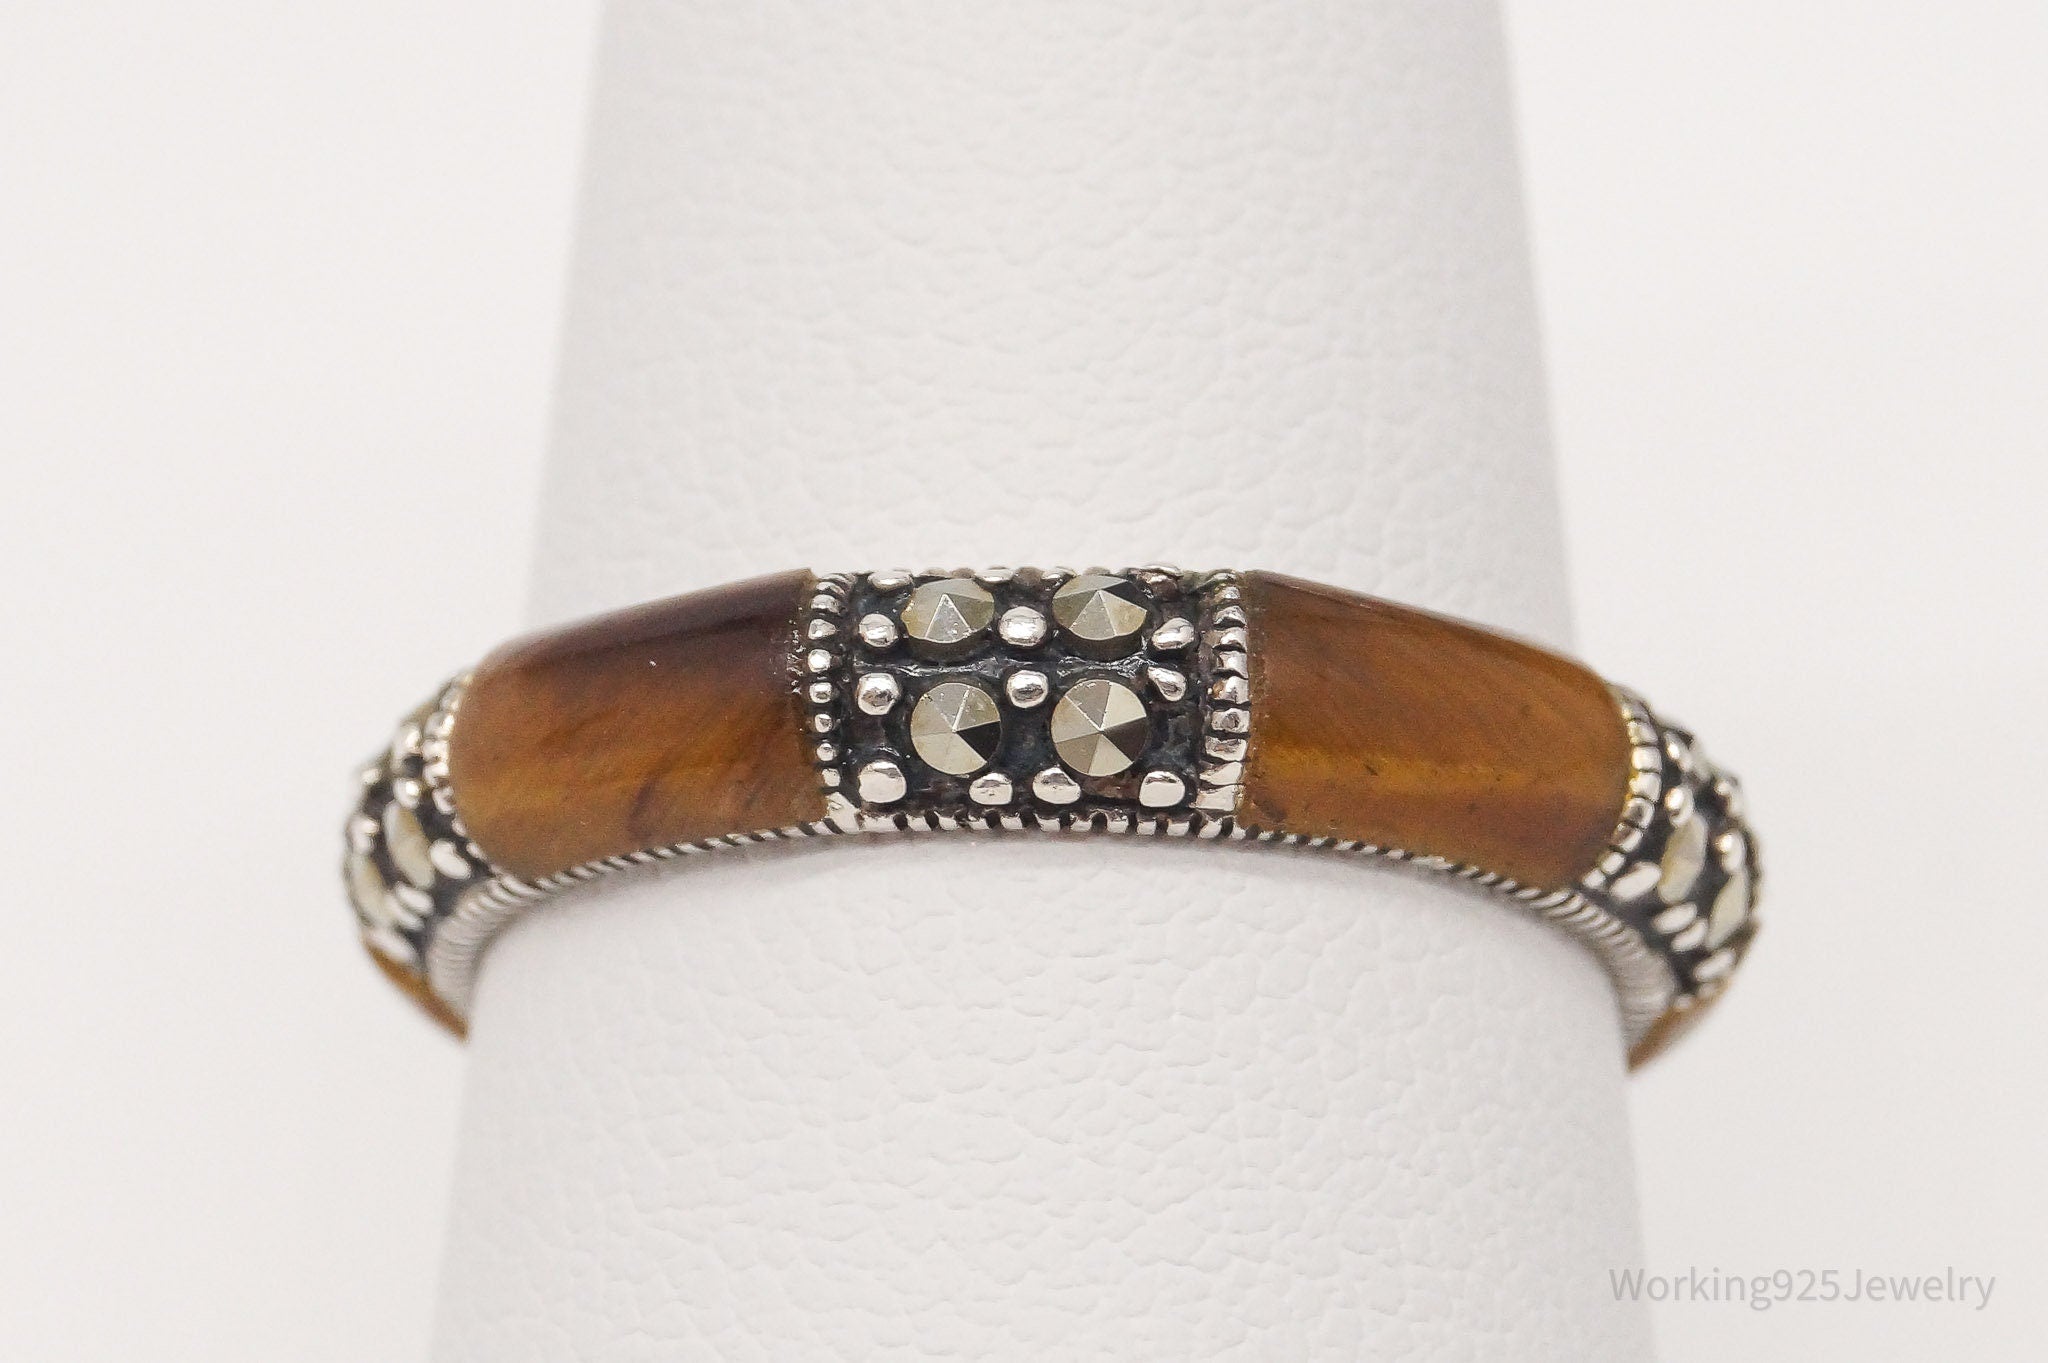 Vintage Tigers Eye Marcasite Sterling Silver Ring - Size 7.75